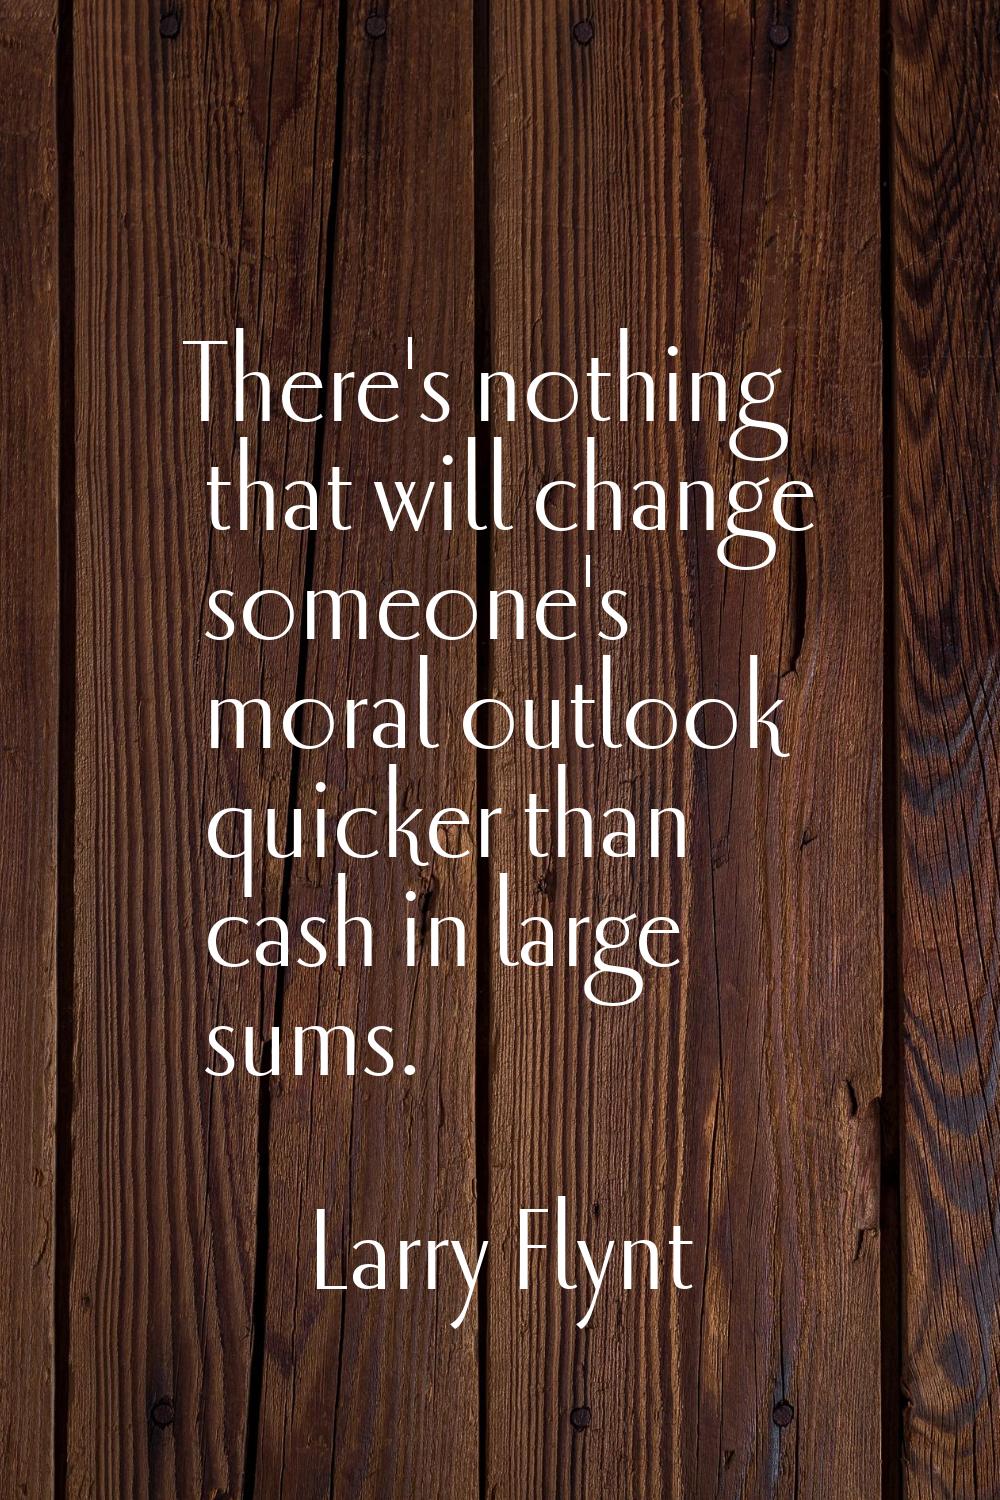 There's nothing that will change someone's moral outlook quicker than cash in large sums.